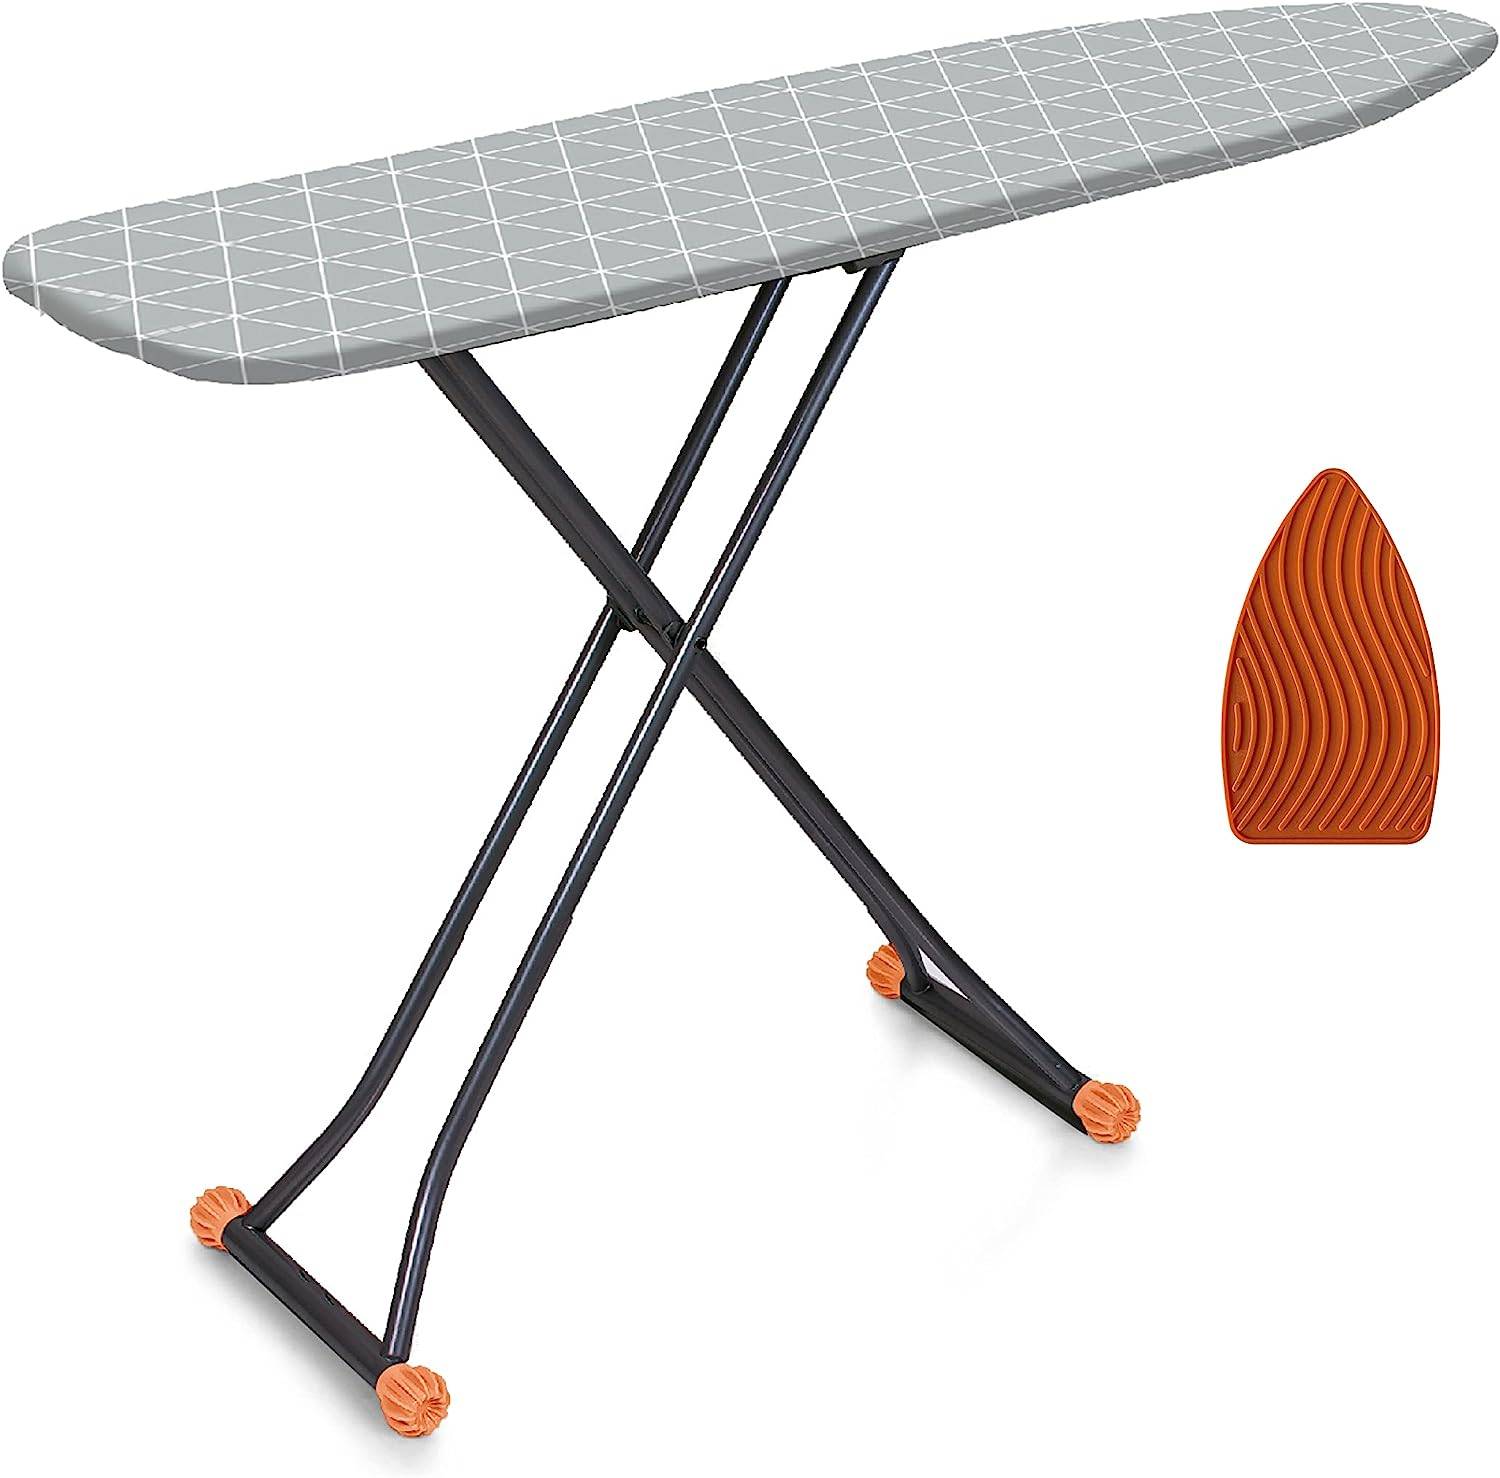  Happhom Ironing Board, Compact and Space Saver Patented Ironing  Board with Extra Thick Heavy Duty Padded Cover, Height Adjustable, Easy  Storage with Smart Hanger and Lightweight Design (13x43) : Home 